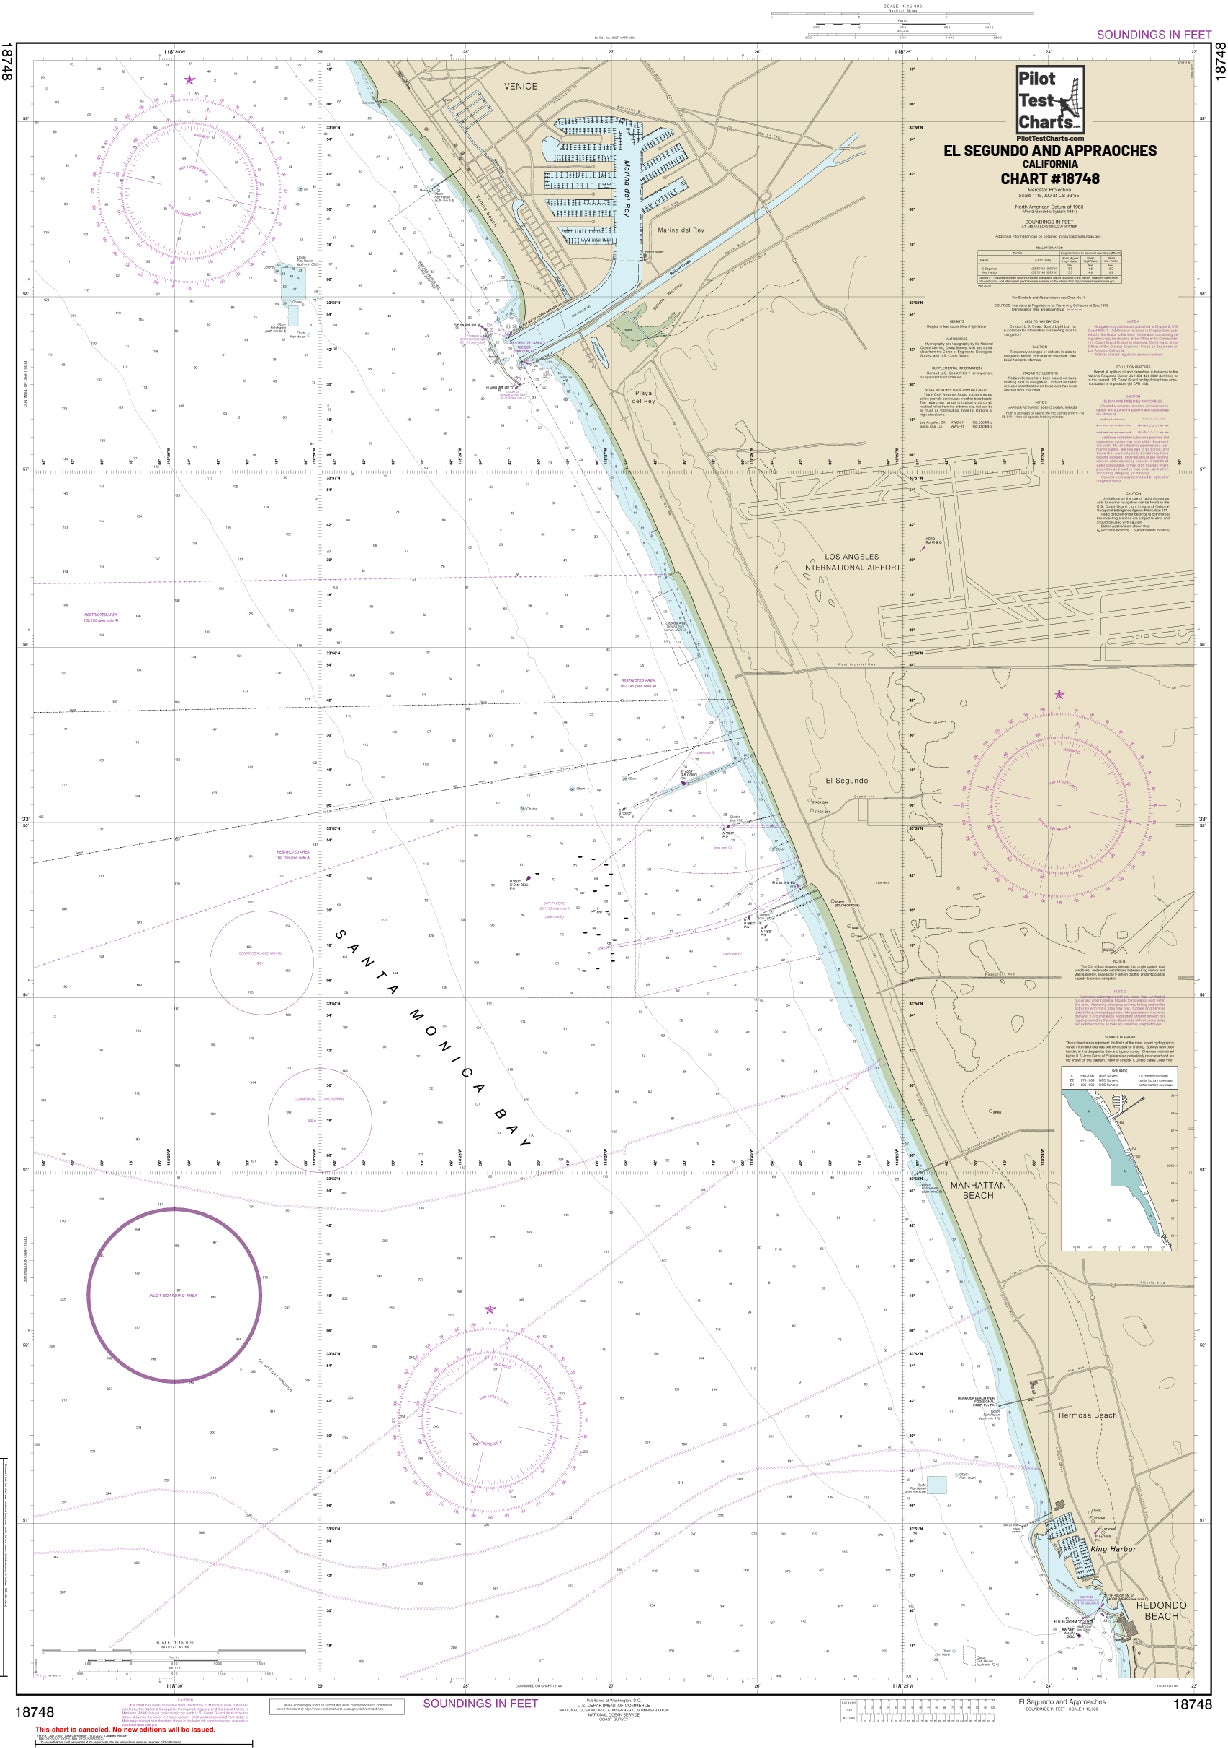 #18748 El Segundo and Approaches Chart